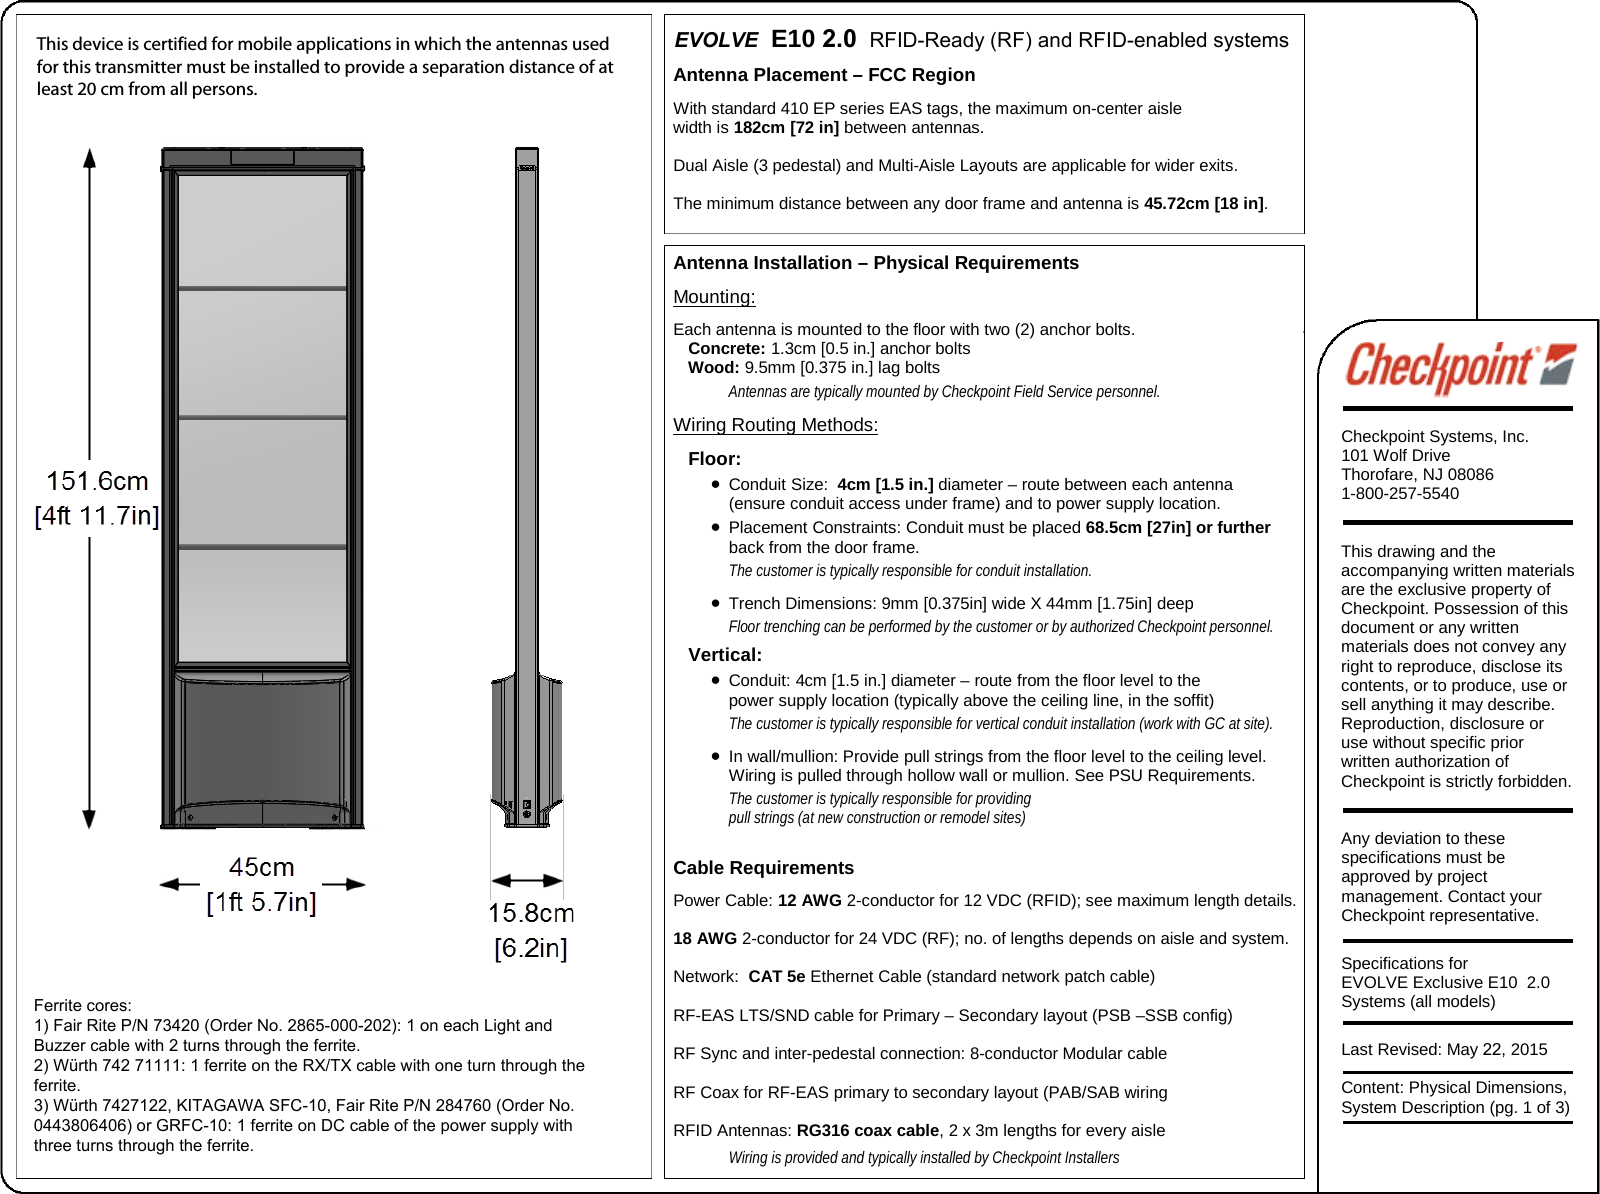 Antenna Placement – FCC Region With standard 410 EP series EAS tags, the maximum on-center aisle width is 182cm [72 in] between antennas.  Dual Aisle (3 pedestal) and Multi-Aisle Layouts are applicable for wider exits. The minimum distance between any door frame and antenna is 45.72cm [18 in]. Antenna Installation – Physical Requirements Mounting: Each antenna is mounted to the floor with two (2) anchor bolts. Concrete: 1.3cm [0.5 in.] anchor bolts Wood: 9.5mm [0.375 in.] lag bolts Antennas are typically mounted by Checkpoint Field Service personnel. Wiring Routing Methods: Floor: •Conduit Size:  4cm [1.5 in.] diameter – route between each antenna(ensure conduit access under frame) and to power supply location. •Placement Constraints: Conduit must be placed 68.5cm [27in] or furtherback from the door frame. The customer is typically responsible for conduit installation. •Trench Dimensions: 9mm [0.375in] wide X 44mm [1.75in] deepFloor trenching can be performed by the customer or by authorized Checkpoint personnel. Vertical: •Conduit: 4cm [1.5 in.] diameter – route from the floor level to thepower supply location (typically above the ceiling line, in the soffit) The customer is typically responsible for vertical conduit installation (work with GC at site).  •In wall/mullion: Provide pull strings from the floor level to the ceiling level.Wiring is pulled through hollow wall or mullion. See PSU Requirements.The customer is typically responsible for providing pull strings (at new construction or remodel sites) Cable Requirements Power Cable: 12 AWG 2-conductor for 12 VDC (RFID); see maximum length details. 18 AWG 2-conductor for 24 VDC (RF); no. of lengths depends on aisle and system.  Network:  CAT 5e Ethernet Cable (standard network patch cable) RF-EAS LTS/SND cable for Primary – Secondary layout (PSB –SSB config) RF Sync and inter-pedestal connection: 8-conductor Modular cable RF Coax for RF-EAS primary to secondary layout (PAB/SAB wiring RFID Antennas: RG316 coax cable, 2 x 3m lengths for every aisle Wiring is provided and typically installed by Checkpoint Installers   EVOLVE  E10 2.0  RFID-Ready (RF) and RFID-enabled systems Checkpoint Systems, Inc. 101 Wolf Drive Thorofare, NJ 08086 1-800-257-5540 This drawing and the accompanying written materials are the exclusive property of Checkpoint. Possession of this document or any written materials does not convey any right to reproduce, disclose its contents, or to produce, use or sell anything it may describe. Reproduction, disclosure or use without specific prior written authorization of Checkpoint is strictly forbidden. Any deviation to these specifications must be approved by project management. Contact your Checkpoint representative. Specifications for EVOLVE Exclusive E10  2.0 Systems (all models) Last Revised: May 22, 2015 Content: Physical Dimensions, System Description (pg. 1 of 3) This device is certified for mobile applications in which the antennas used for this transmitter must be installed to provide a separation distance of at least 20 cm from all persons.Ferrite cores: 1) Fair Rite P/N 73420 (Order No. 2865-000-202): 1 on each Light and Buzzer cable with 2 turns through the ferrite. 2) Würth 742 71111: 1 ferrite on the RX/TX cable with one turn through the ferrite. 3) Würth 7427122, KITAGAWA SFC-10, Fair Rite P/N 284760 (Order No. 0443806406) or GRFC-10: 1 ferrite on DC cable of the power supply with three turns through the ferrite. 